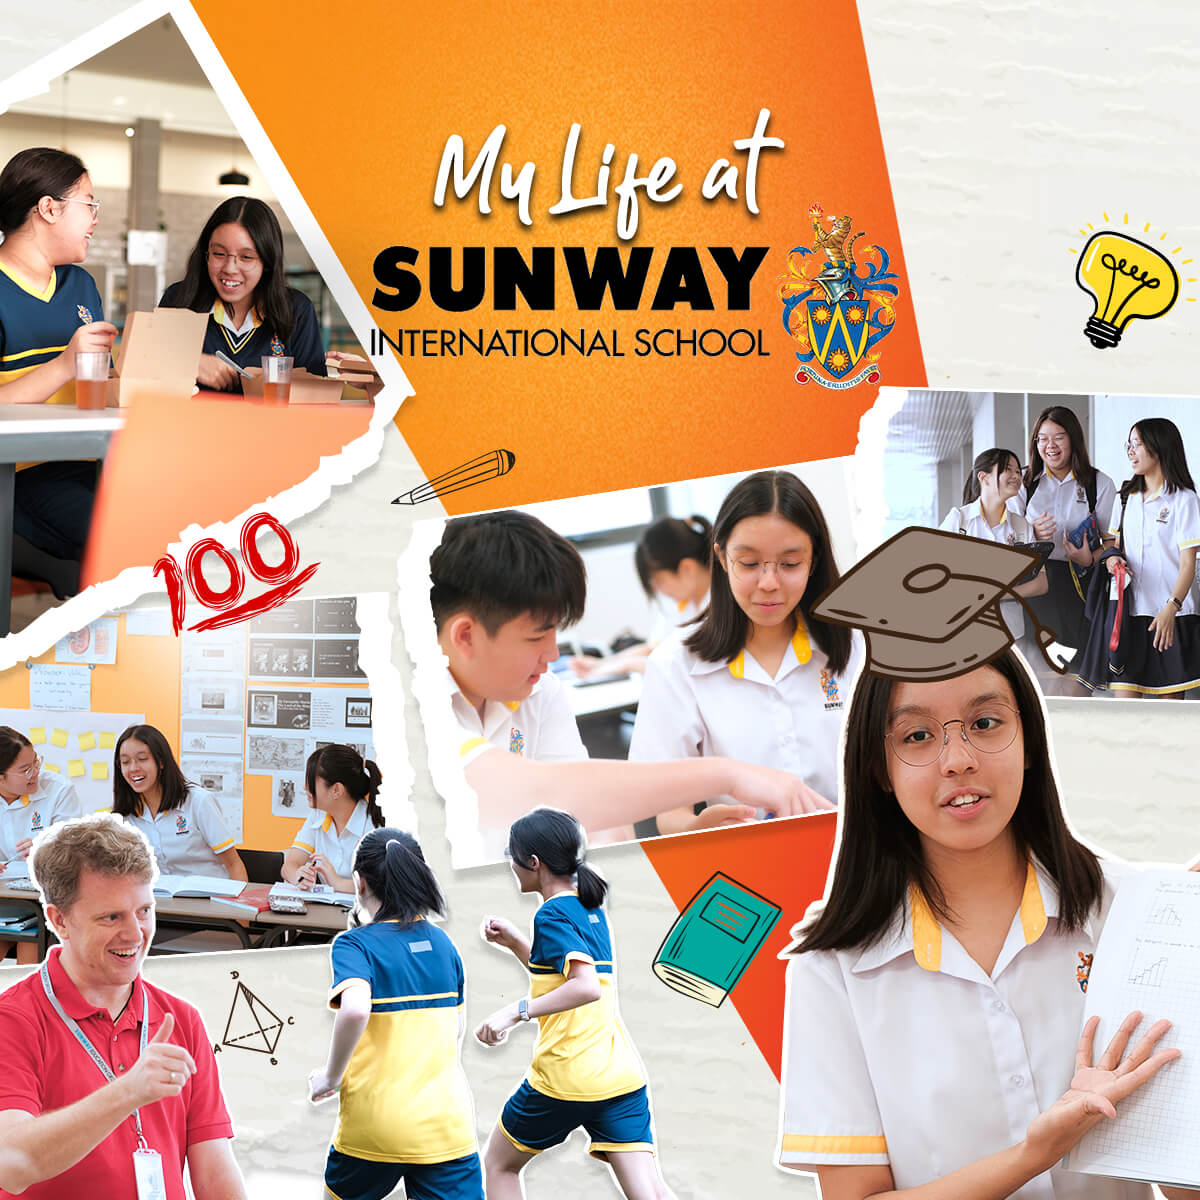 Day in the Life of a Sunway International Schools IGCSE Student